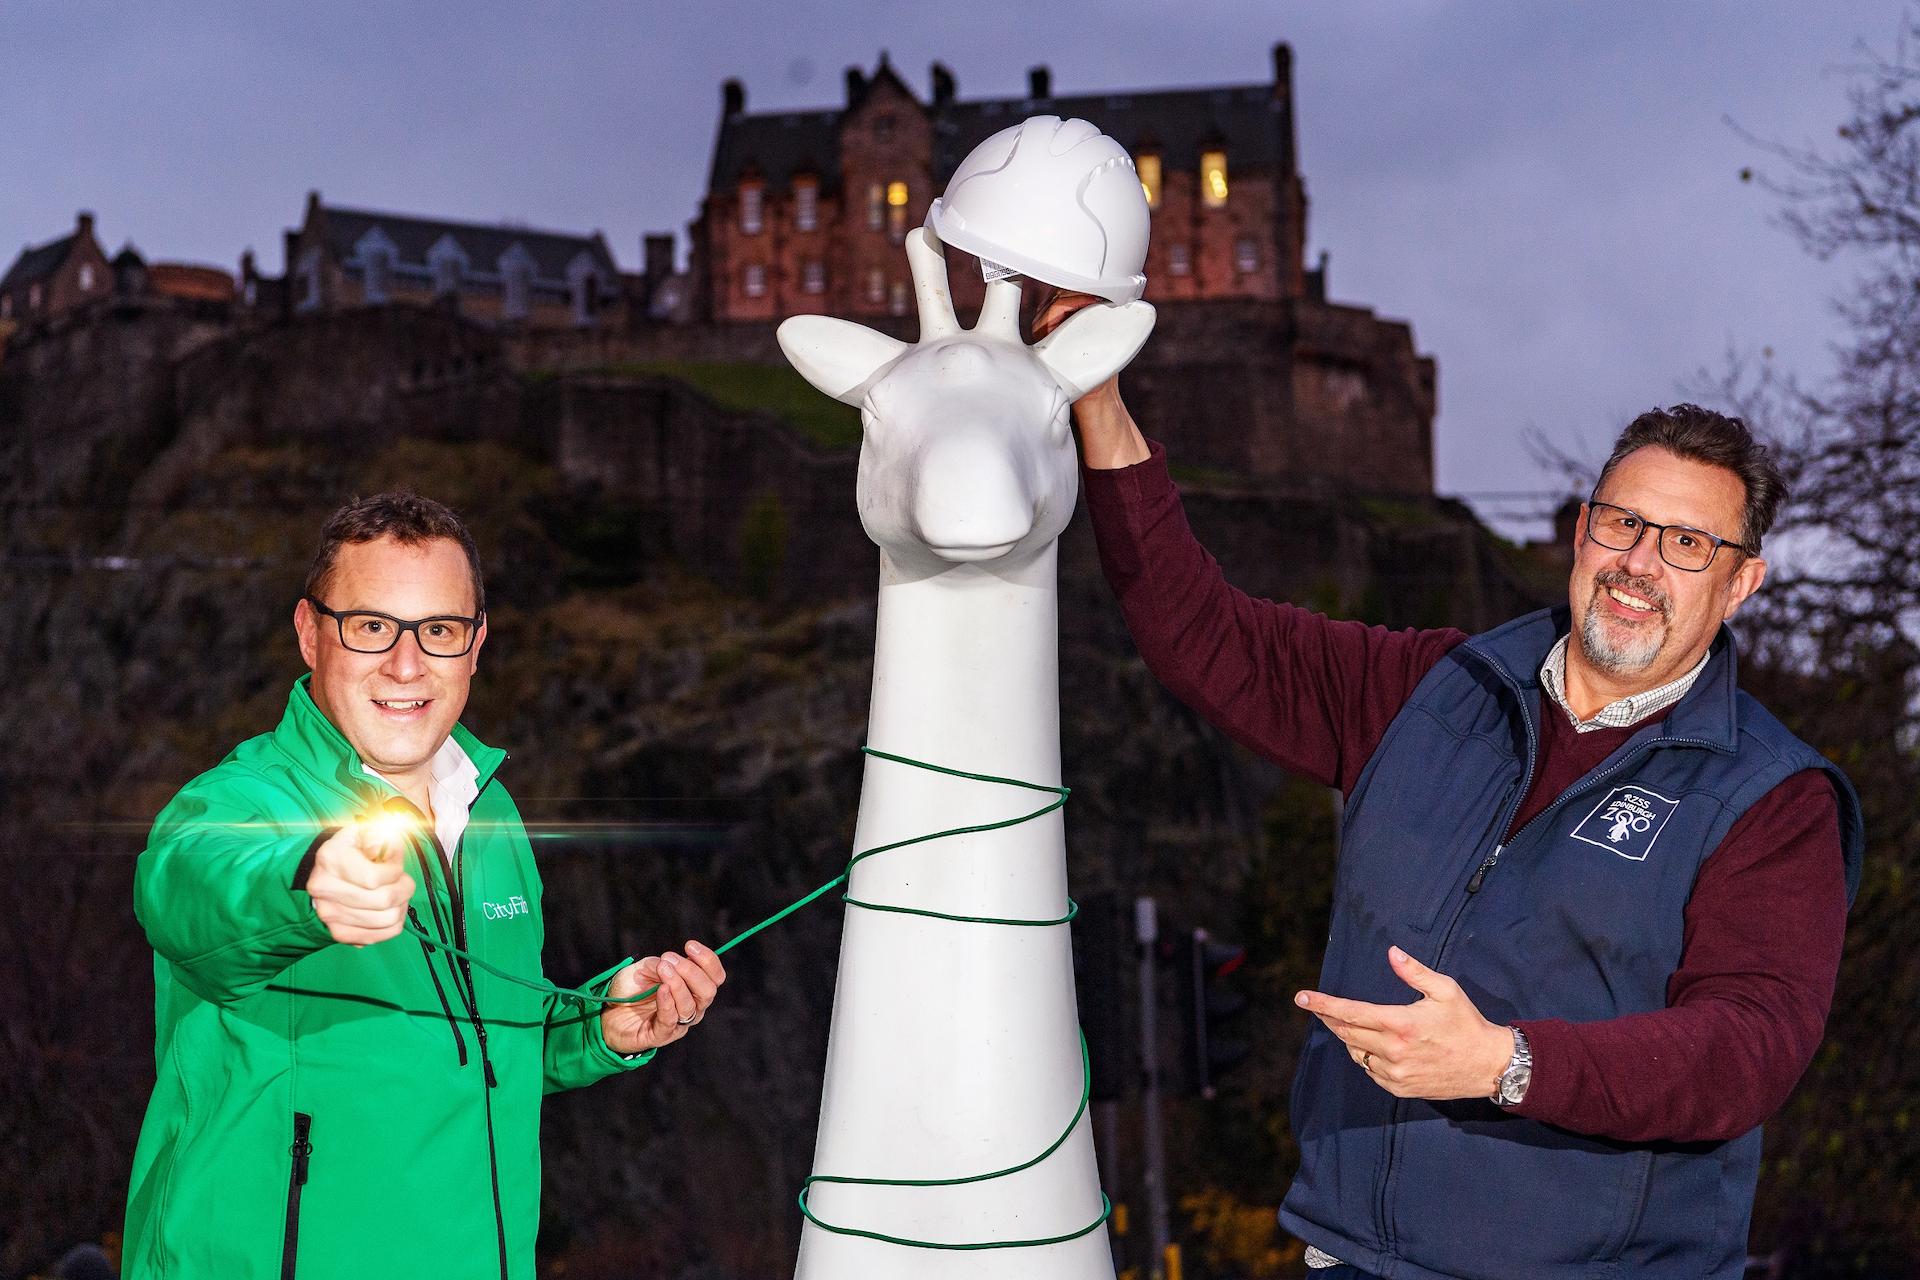 City Fibre Paul Wakefield and RZSS CEO David Field post together with blank Giraffe About Town statue, wire and hard hat in front of Edinburgh Castle

Image: 2021